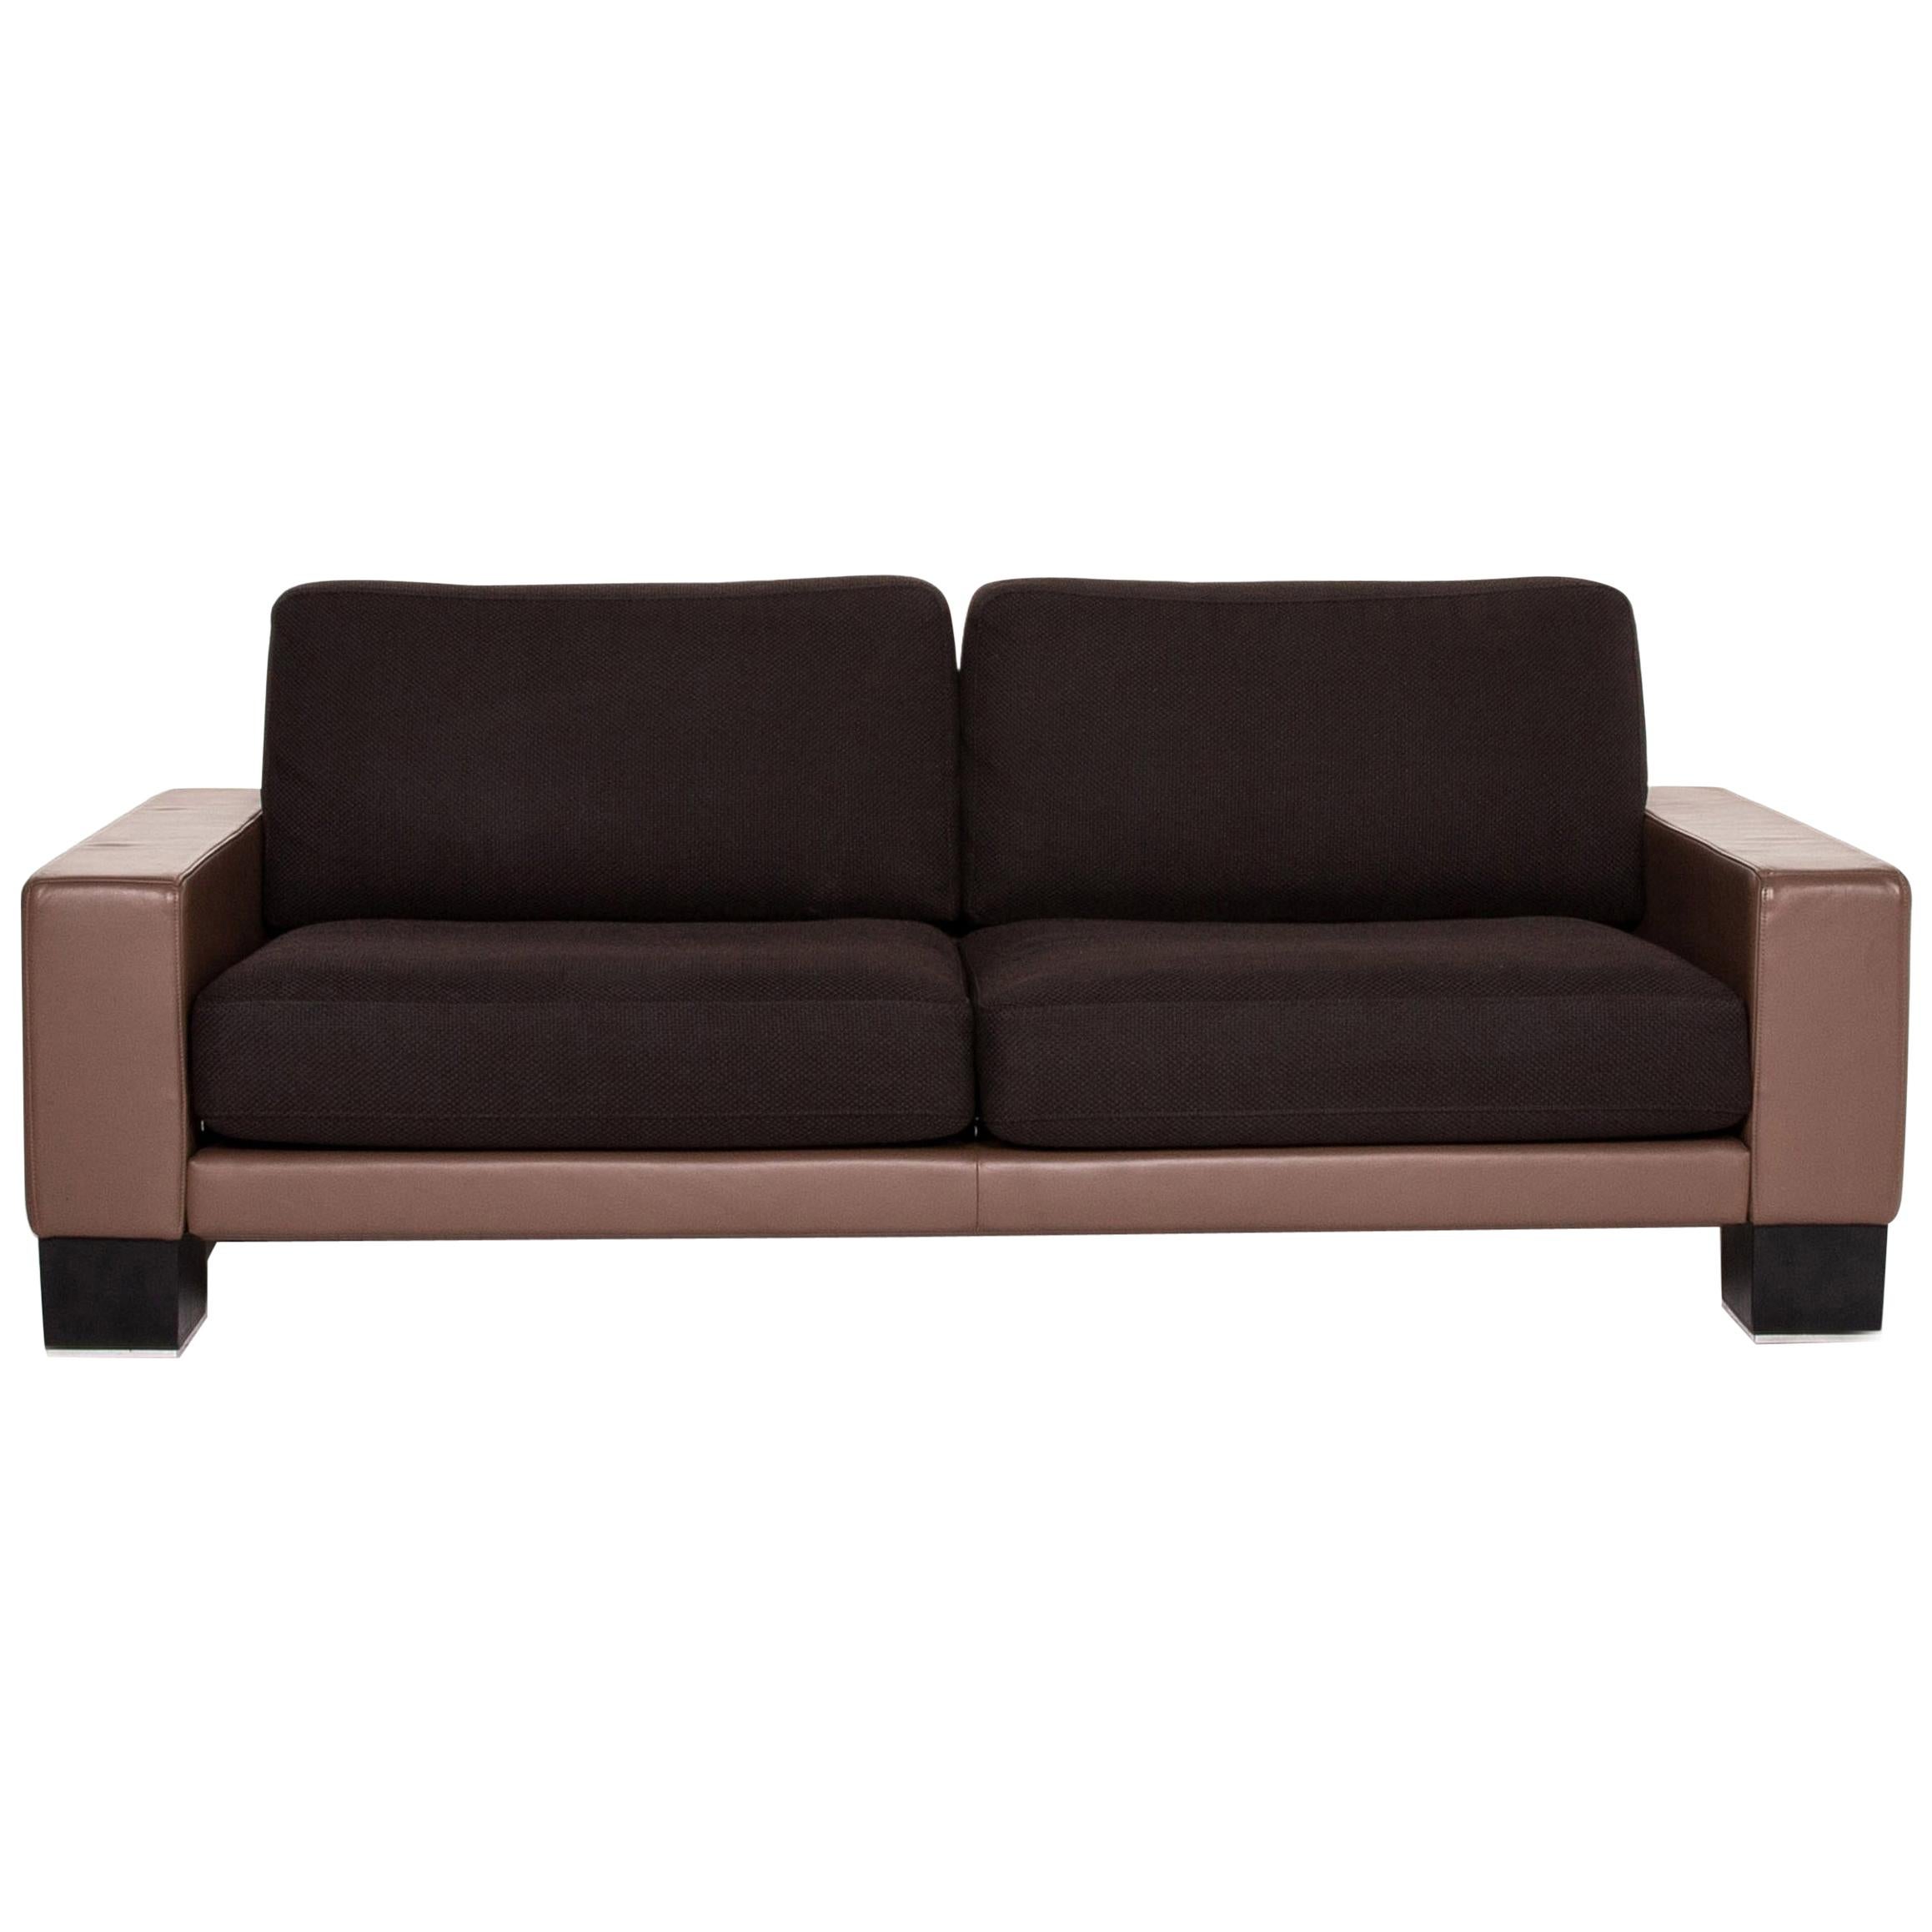 Rolf Benz Ego Leather Fabric Sofa Three-Seat Couch